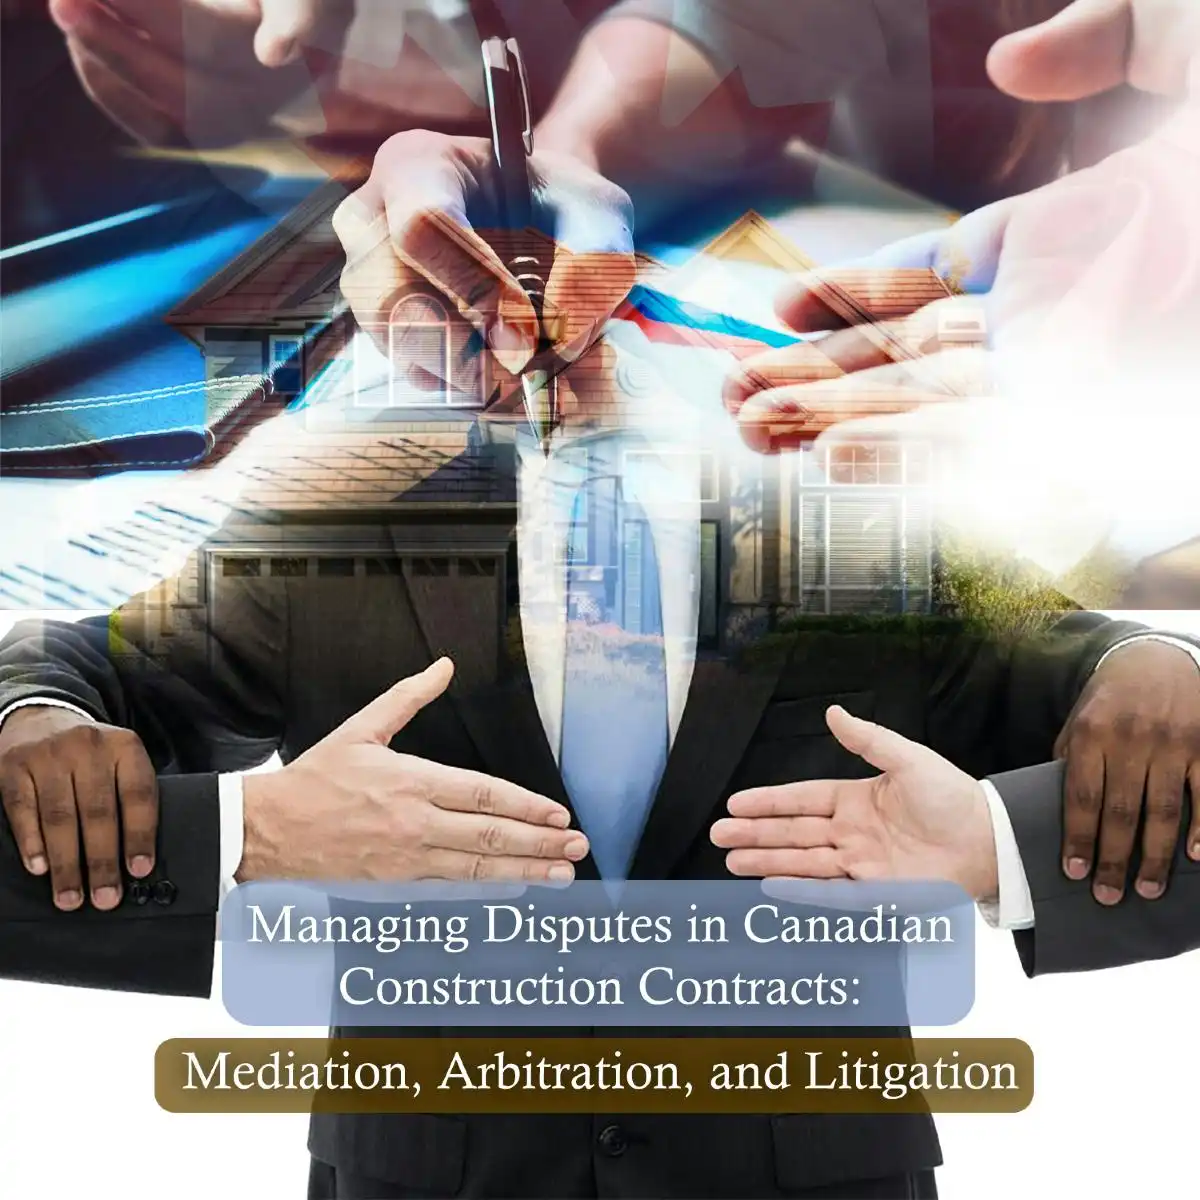 Managing Disputes in Canadian Construction Contracts: Mediation, Arbitration, and Litigation